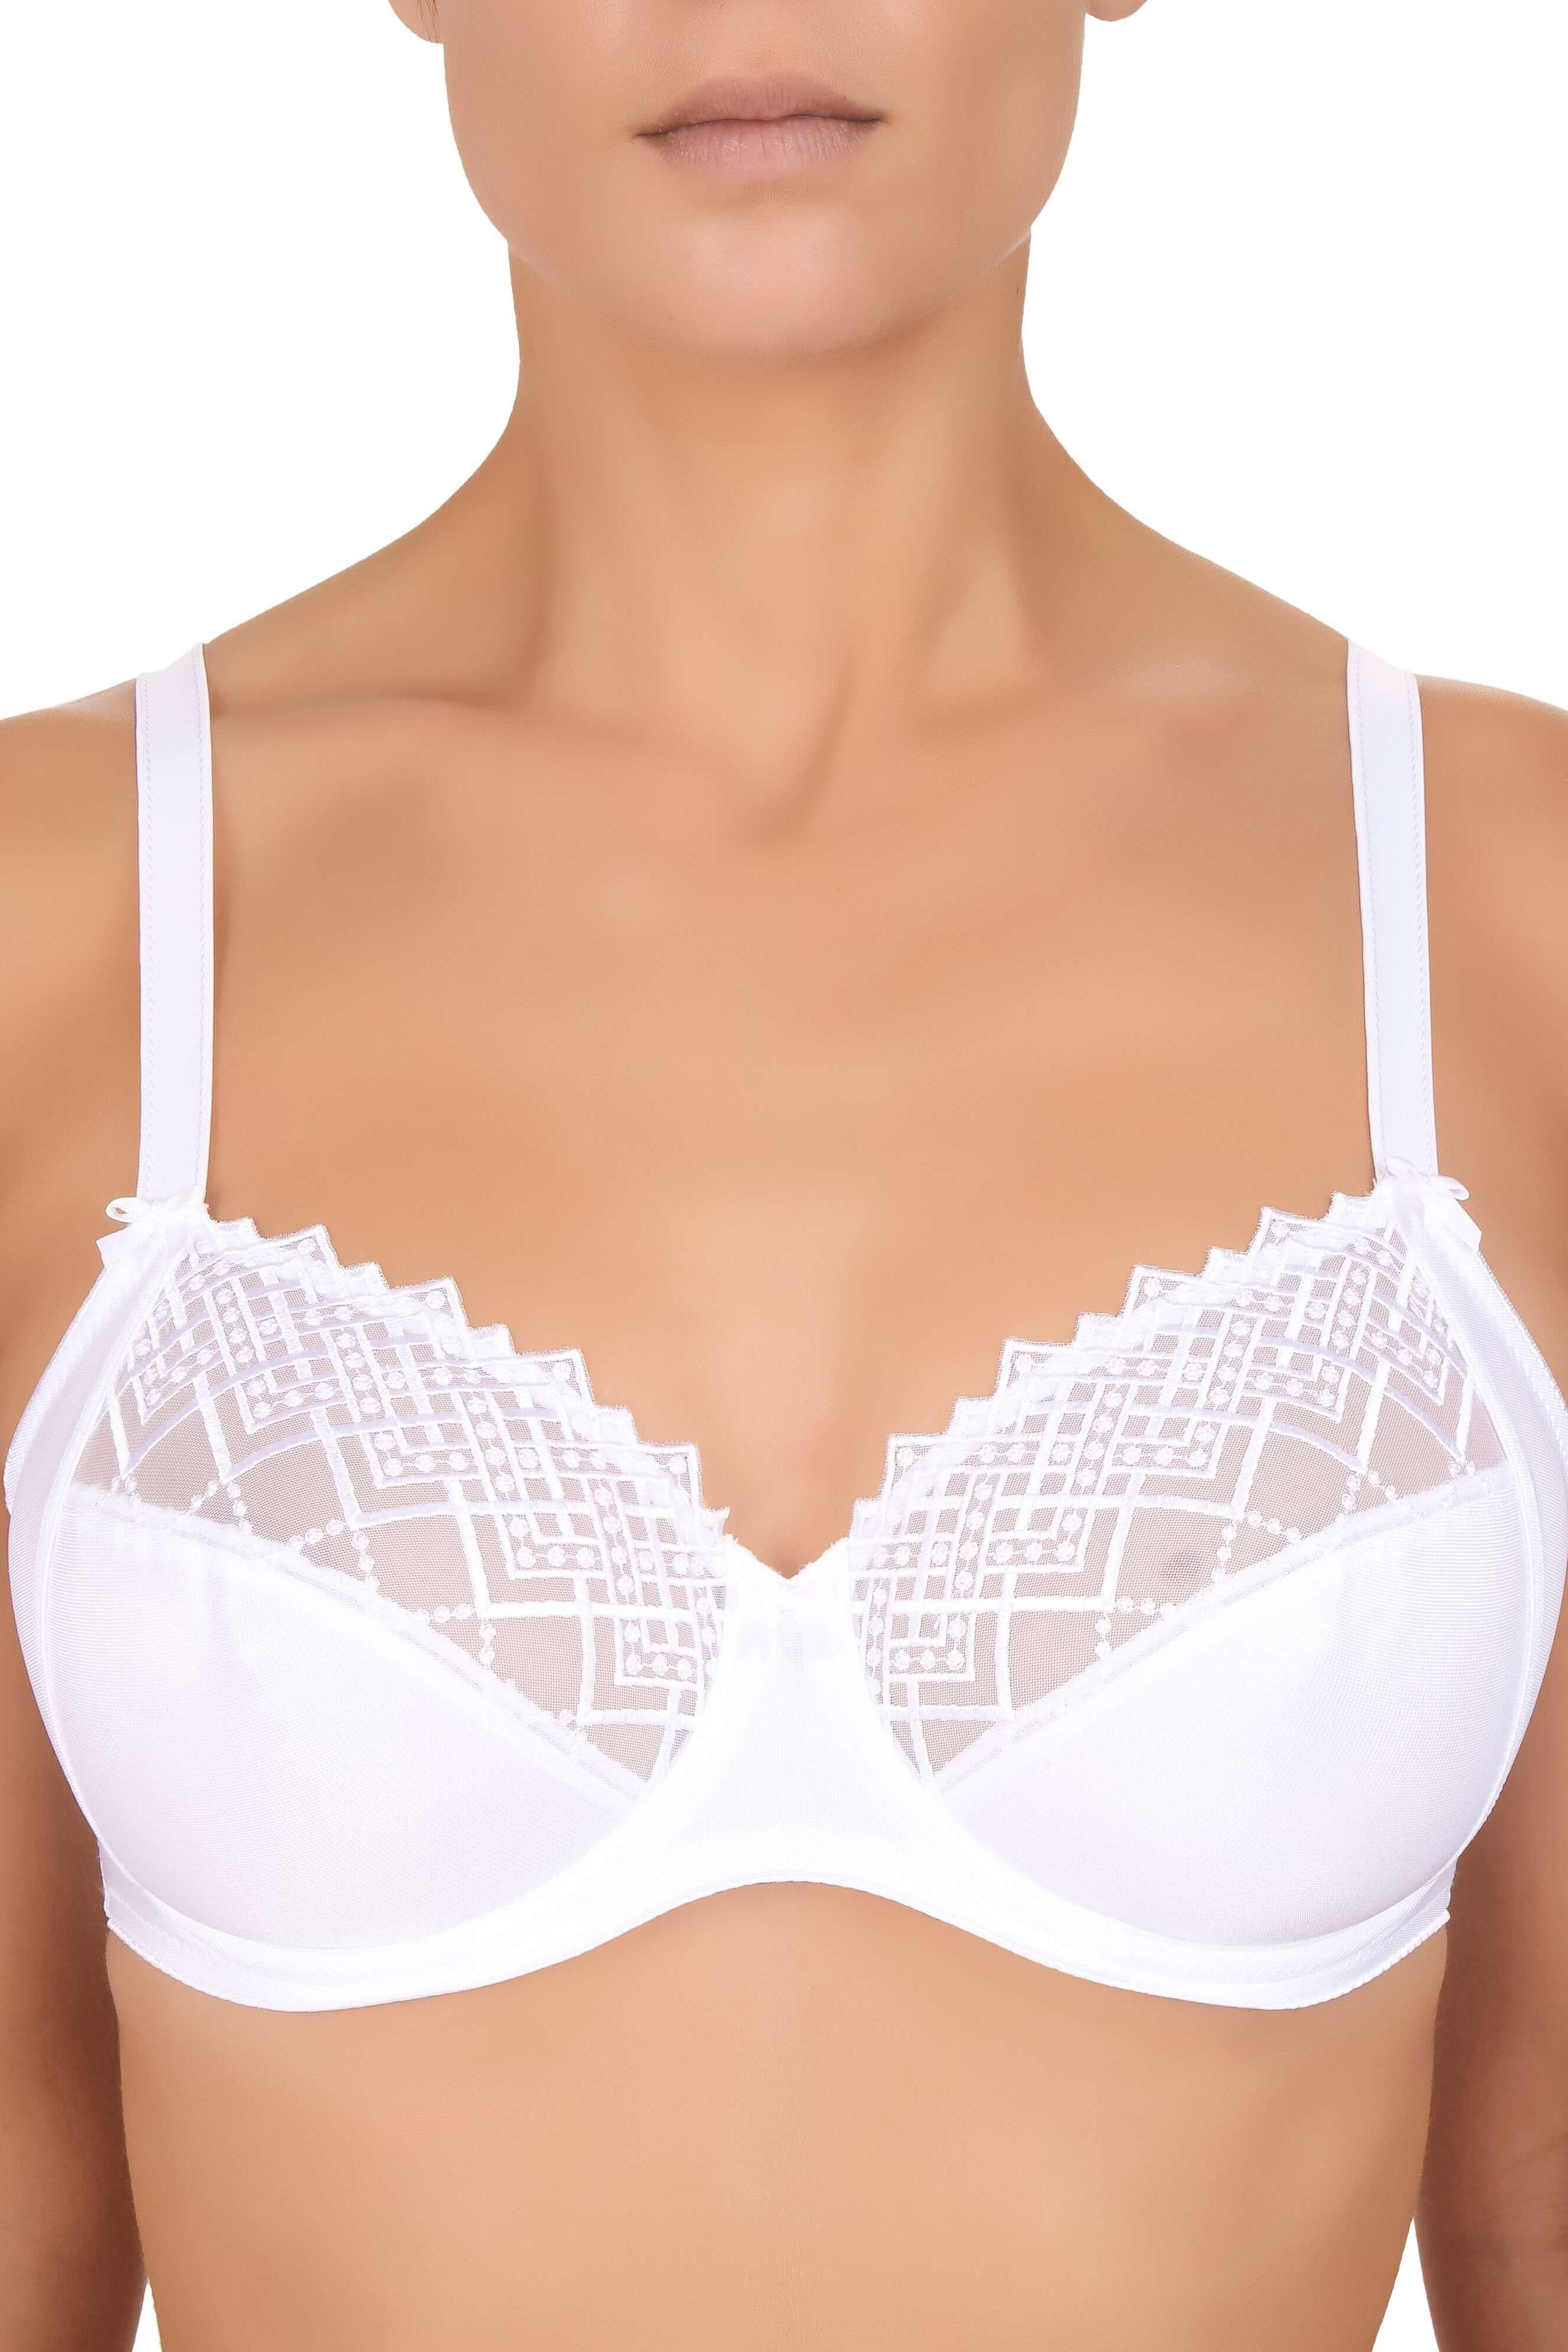 Felina Joy wired bra 003 White buy for the best price CAD$ 109.00 - Canada  and U.S. delivery – Bralissimo